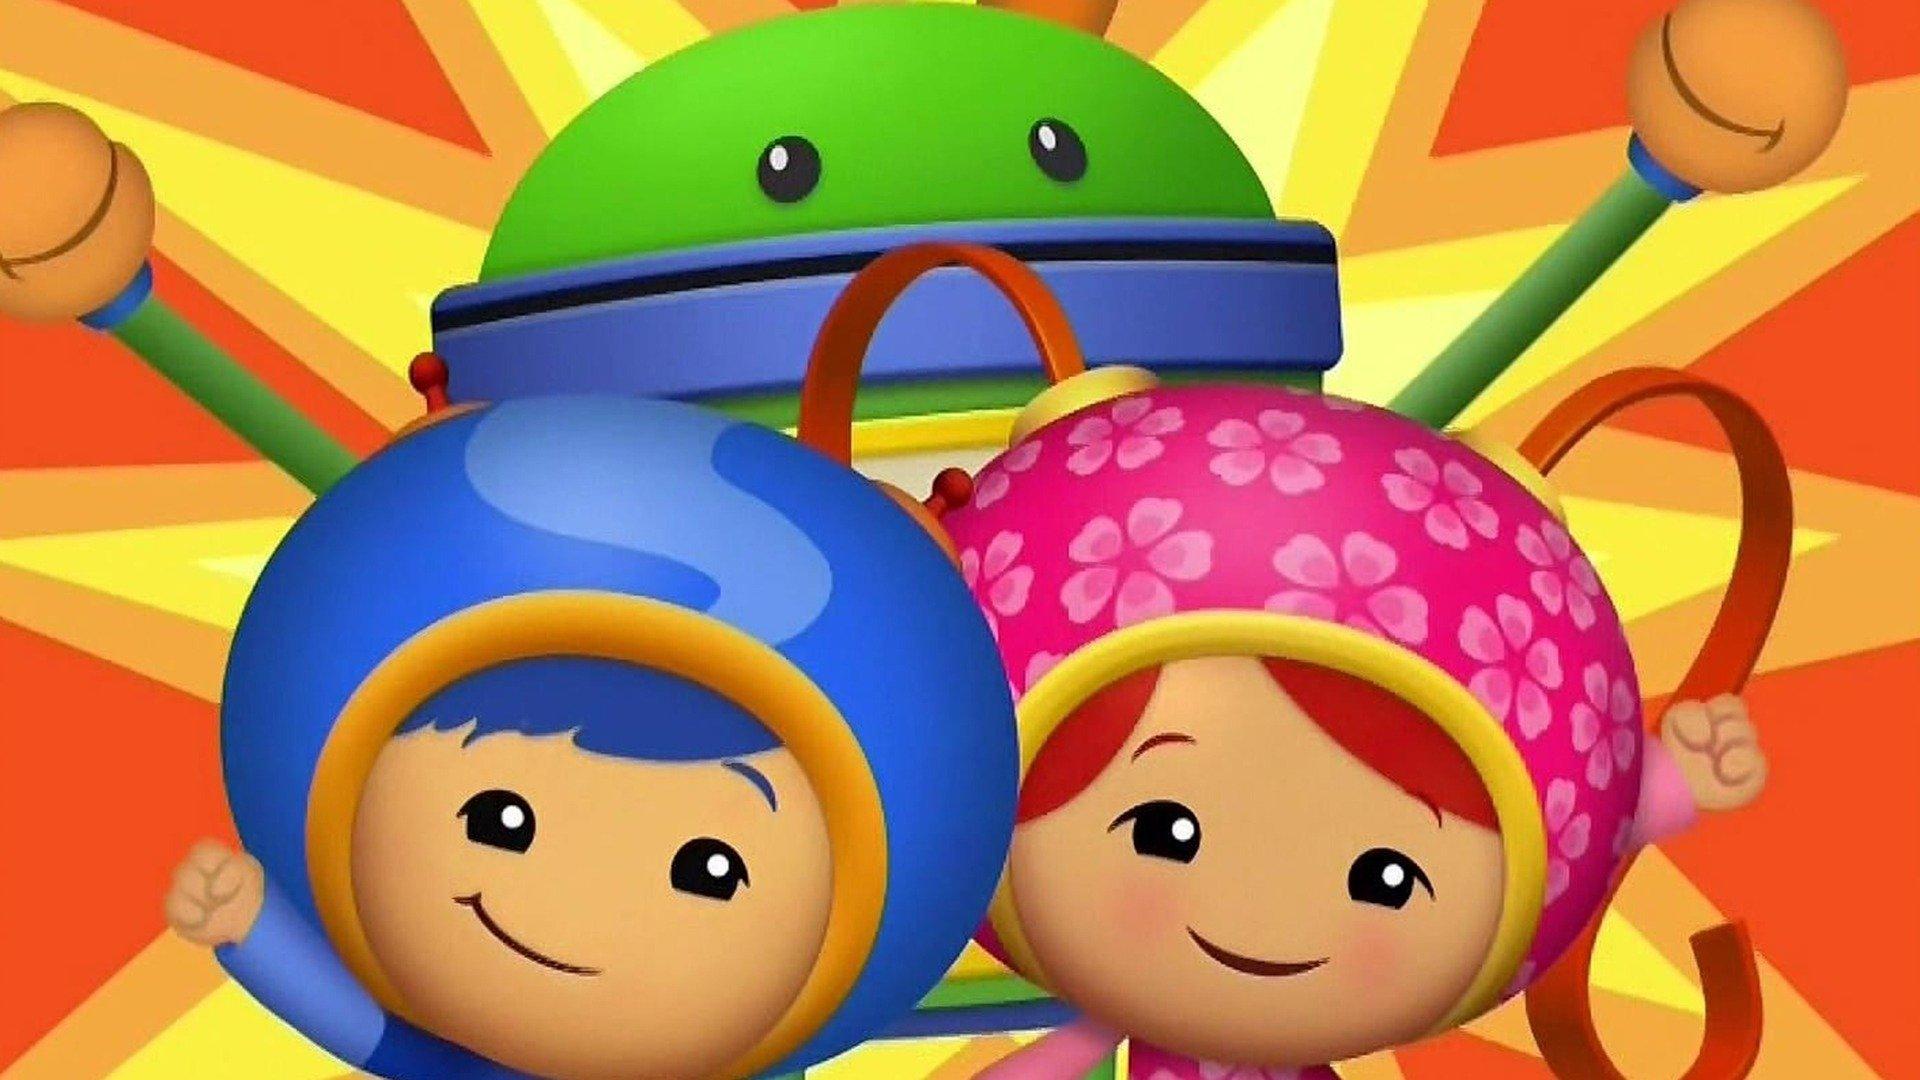 Team Umizoomi Best Wallpaper of This Show!